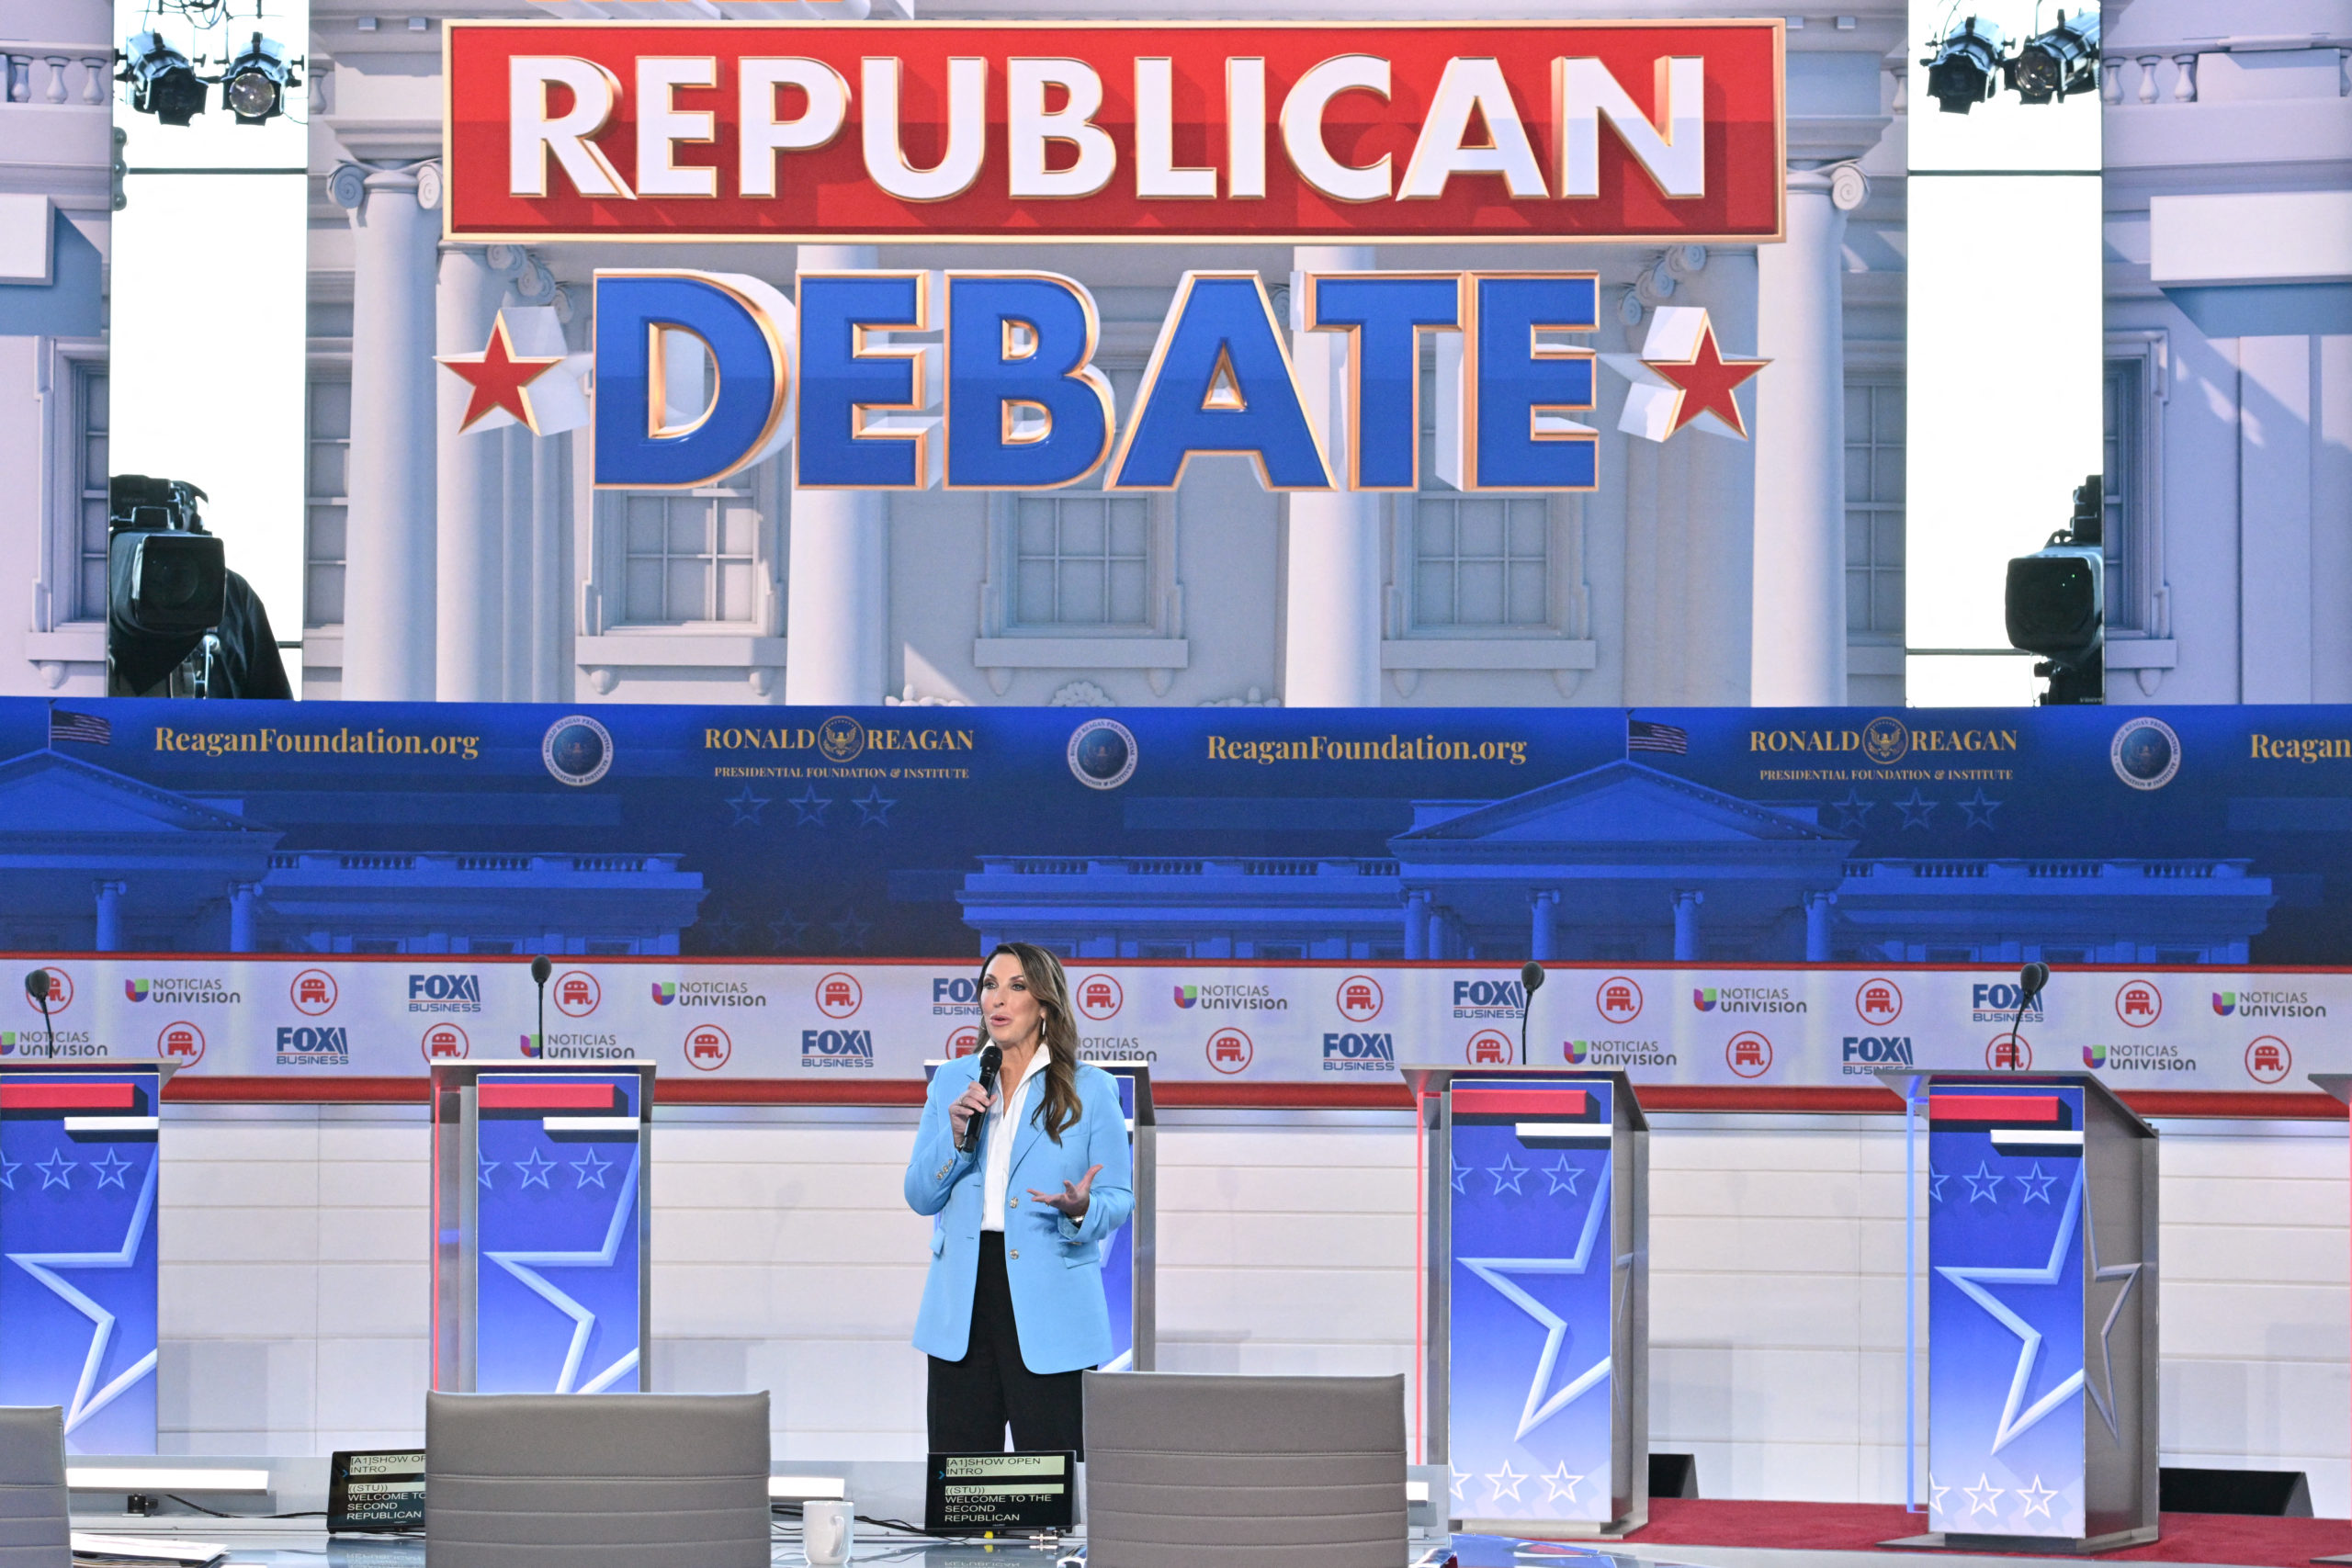 RNC Chair Ronna McDaniel speaks prior to the second Republican presidential primary debate at the Ronald Reagan Presidential Library in Simi Valley, California, on September 27, 2023. (Photo by Robyn BECK / AFP) (Photo by ROBYN BECK/AFP via Getty Images)